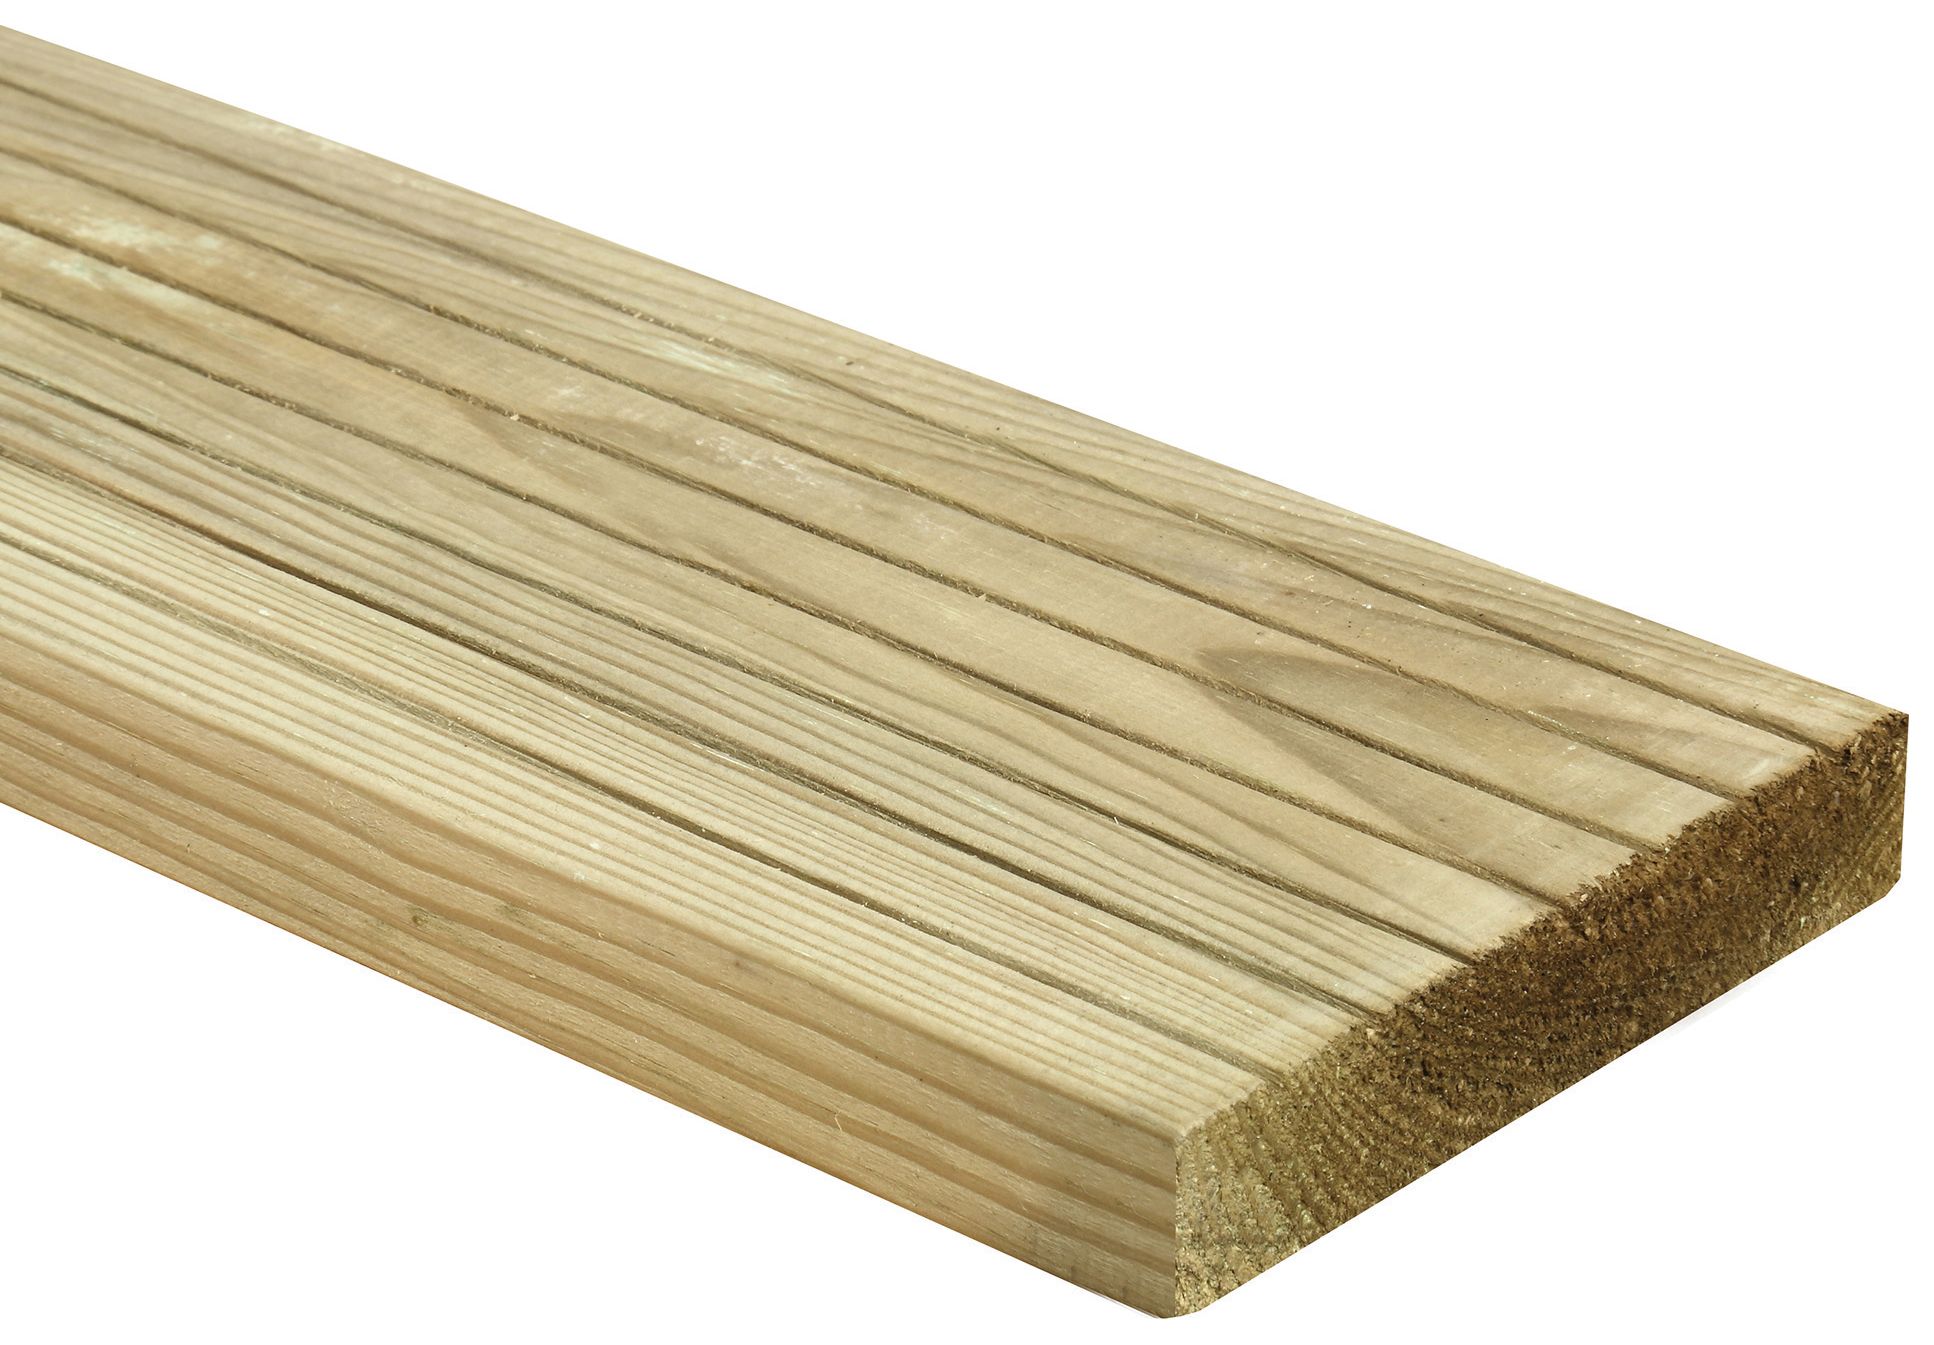 Image of Wickes Natural Pine Deck Board - 25 x 120 x 1800mm